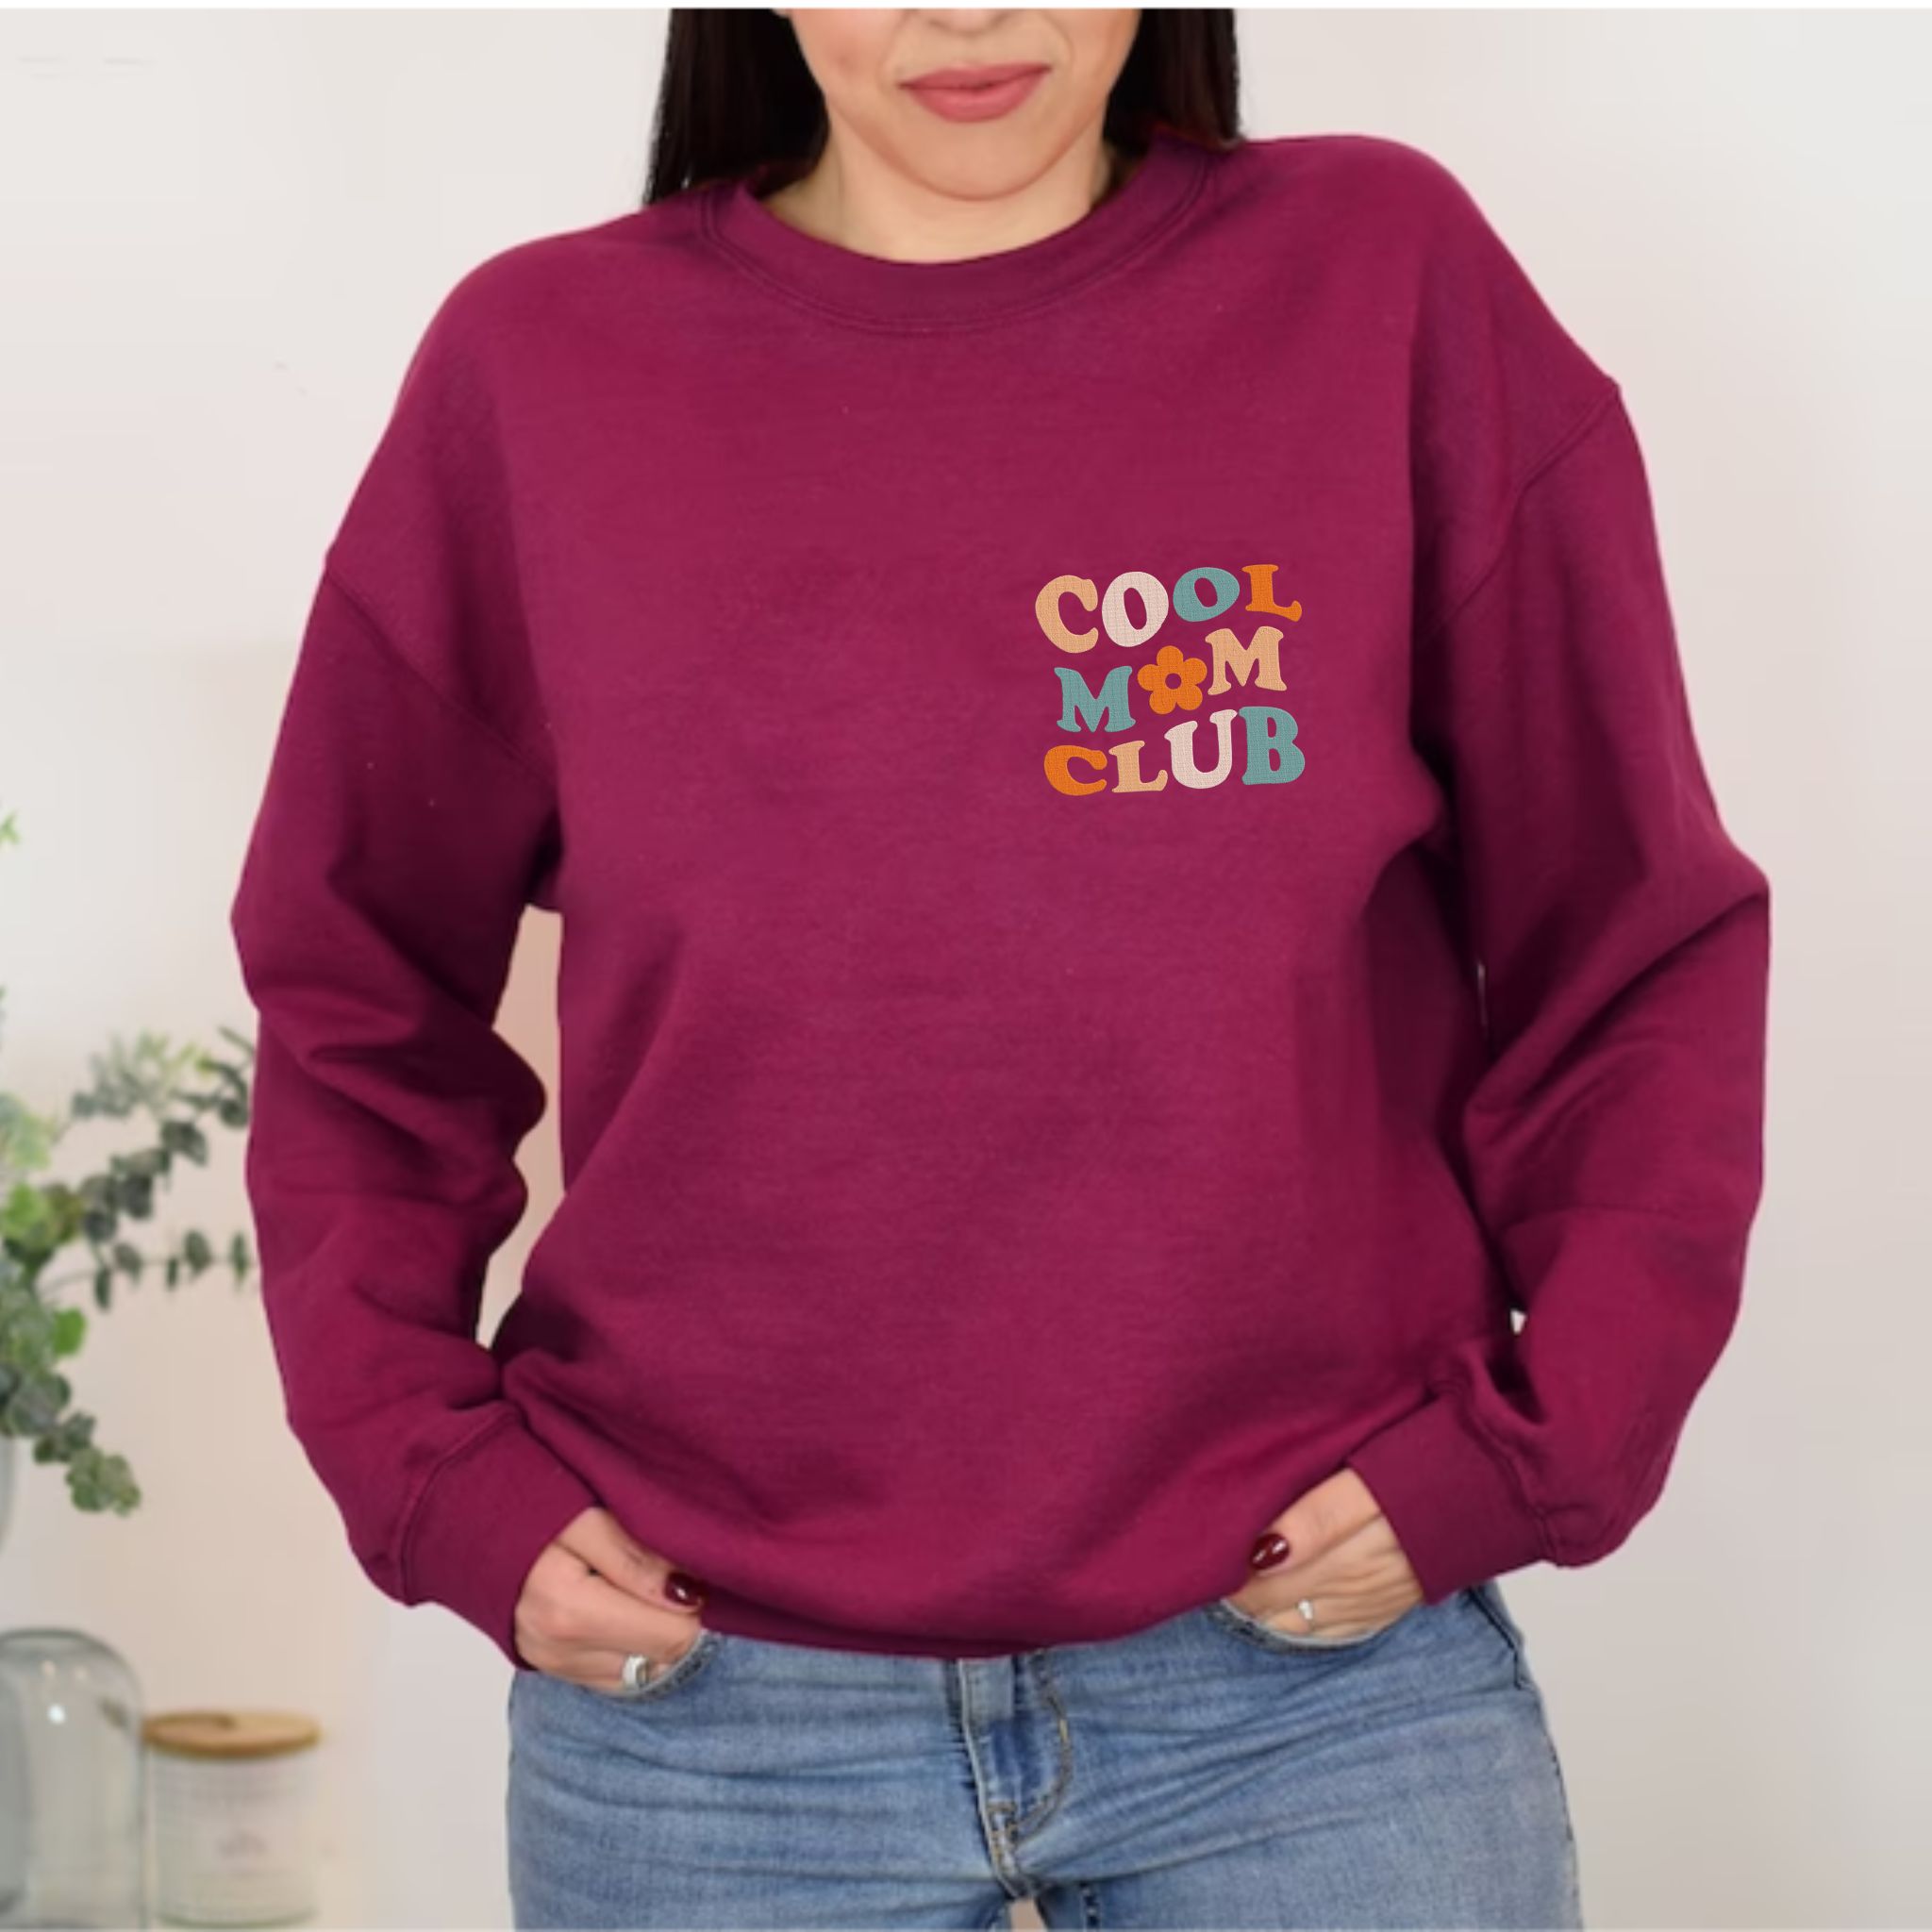 Cool mom club, Typography T-shirt Vector Art for Mother's Day, mom